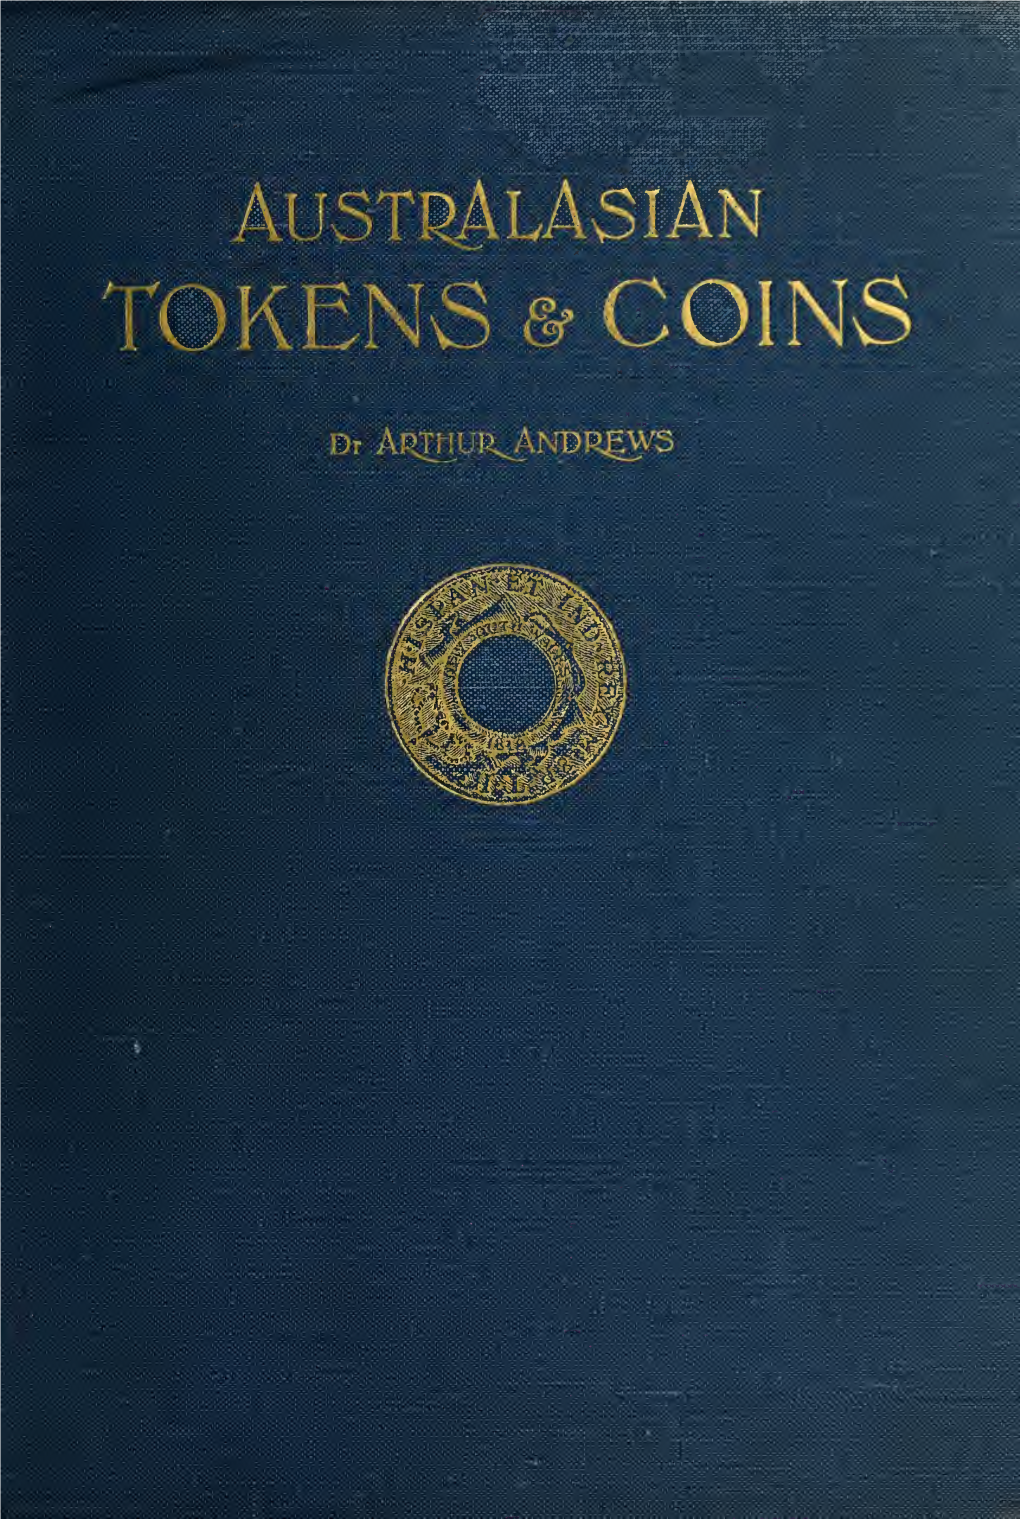 Australasian Tokens and Coins; a Handbook by Dr. Arthur Andrews